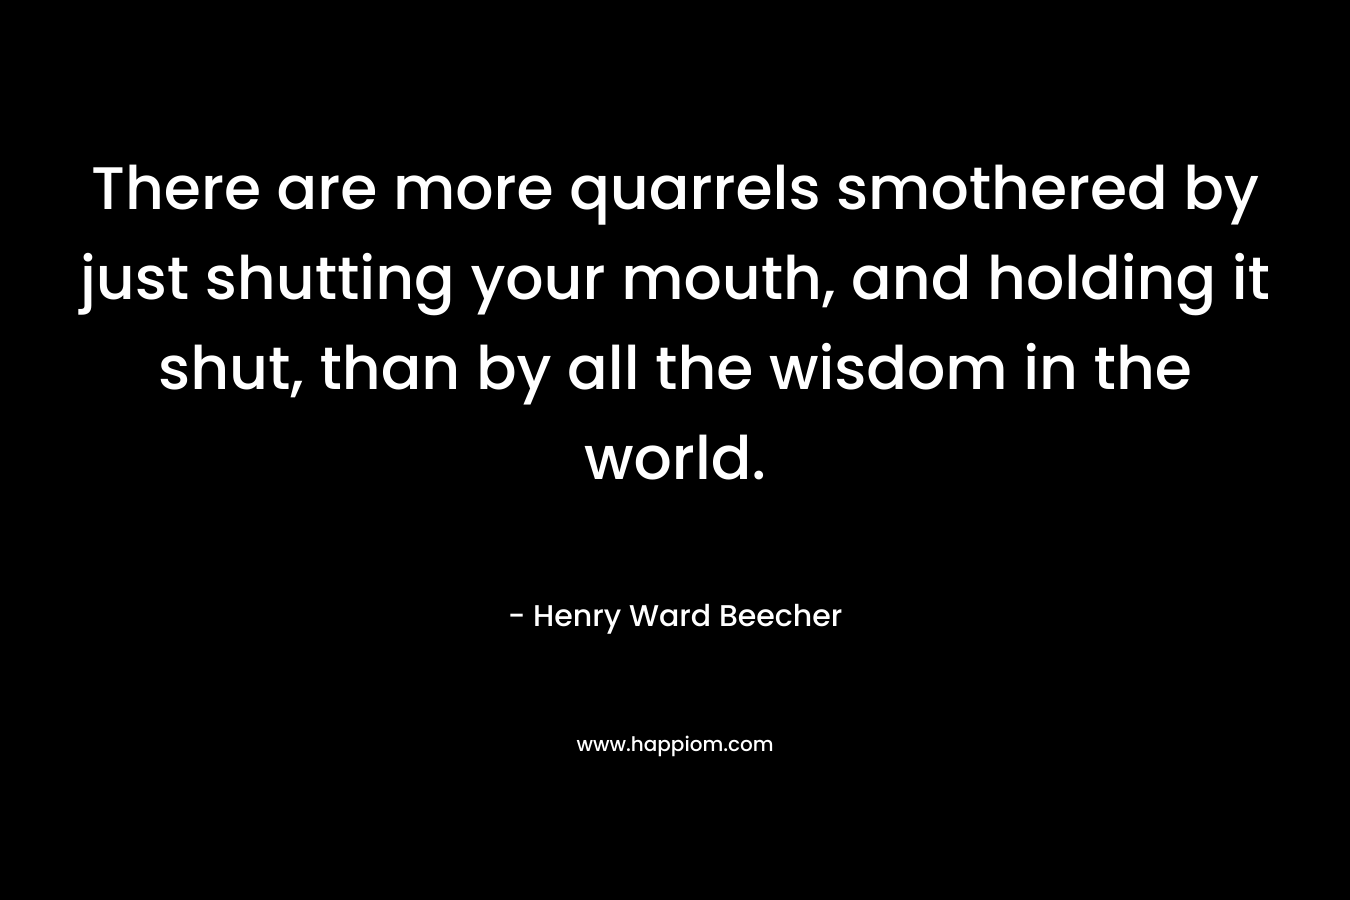 There are more quarrels smothered by just shutting your mouth, and holding it shut, than by all the wisdom in the world. – Henry Ward Beecher